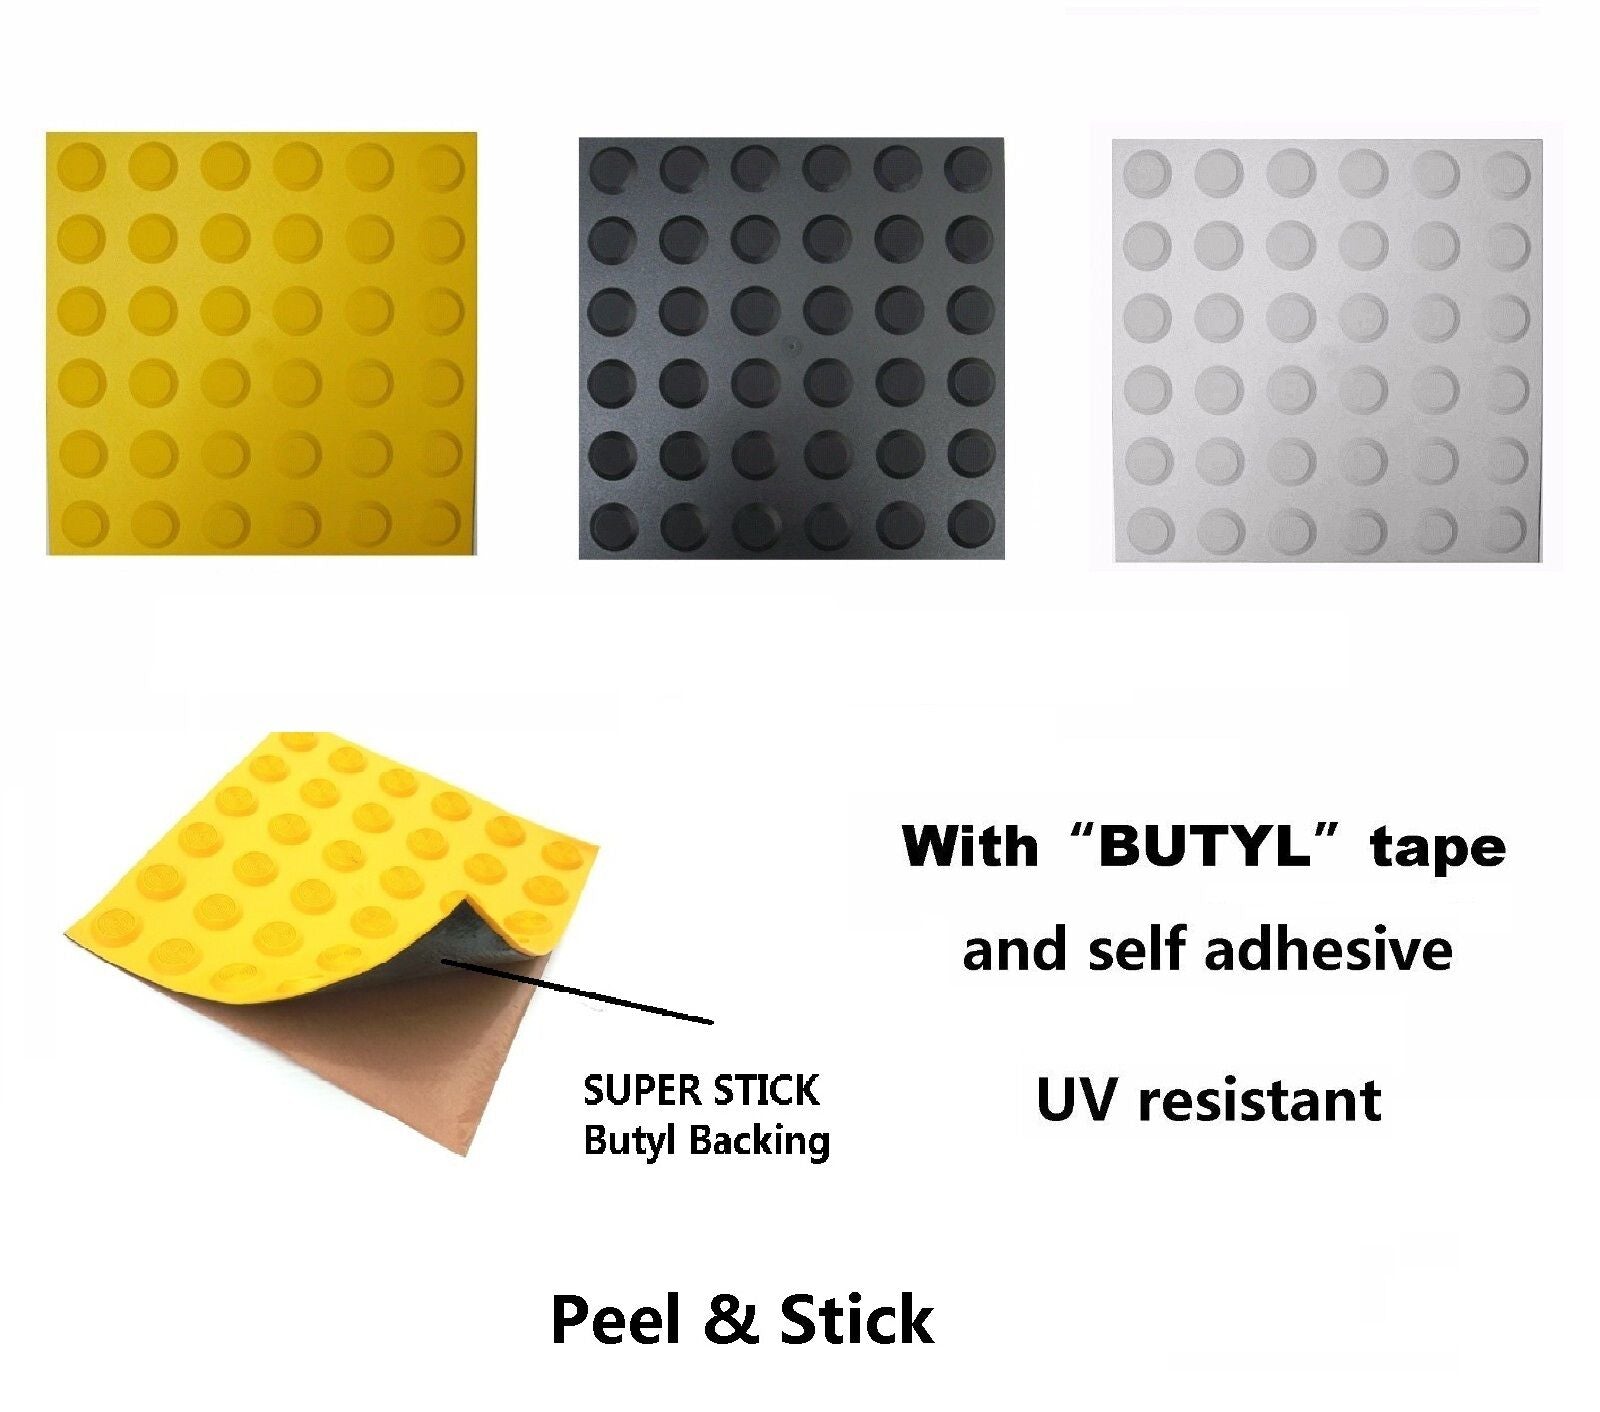 5pcs Peel & Stick Tactile Indicator ground surface Self Adhesive Pad Black Yellow Grey Ivory Colors Available